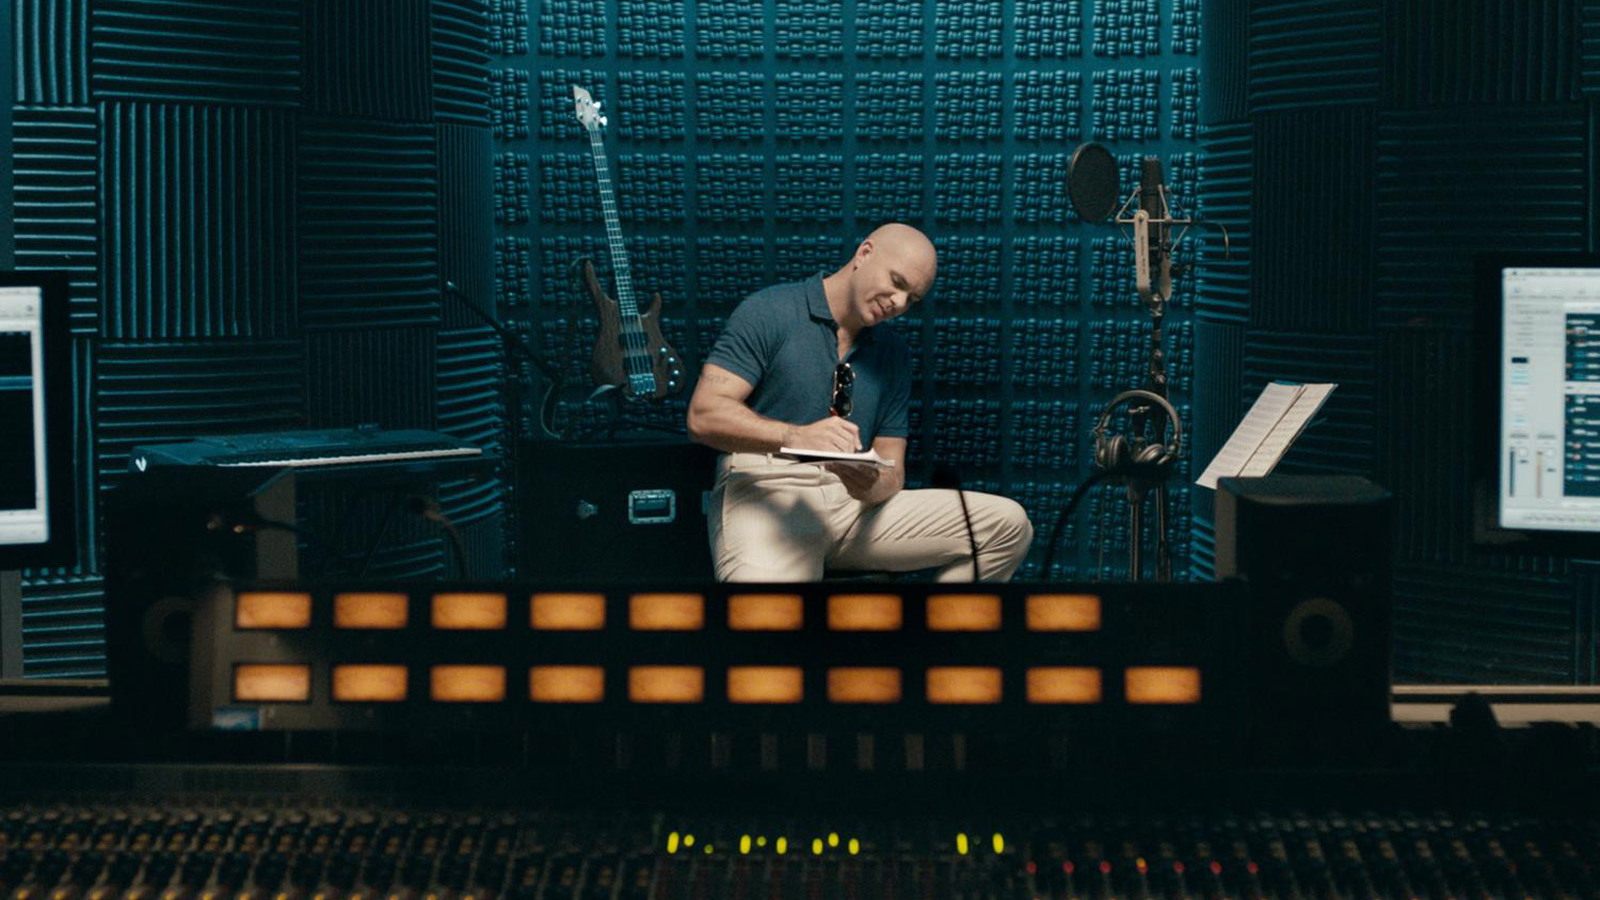 Rapper Pitbull stars in ‘Your Rules’ ad campaign for the 2013 Dodge Dart